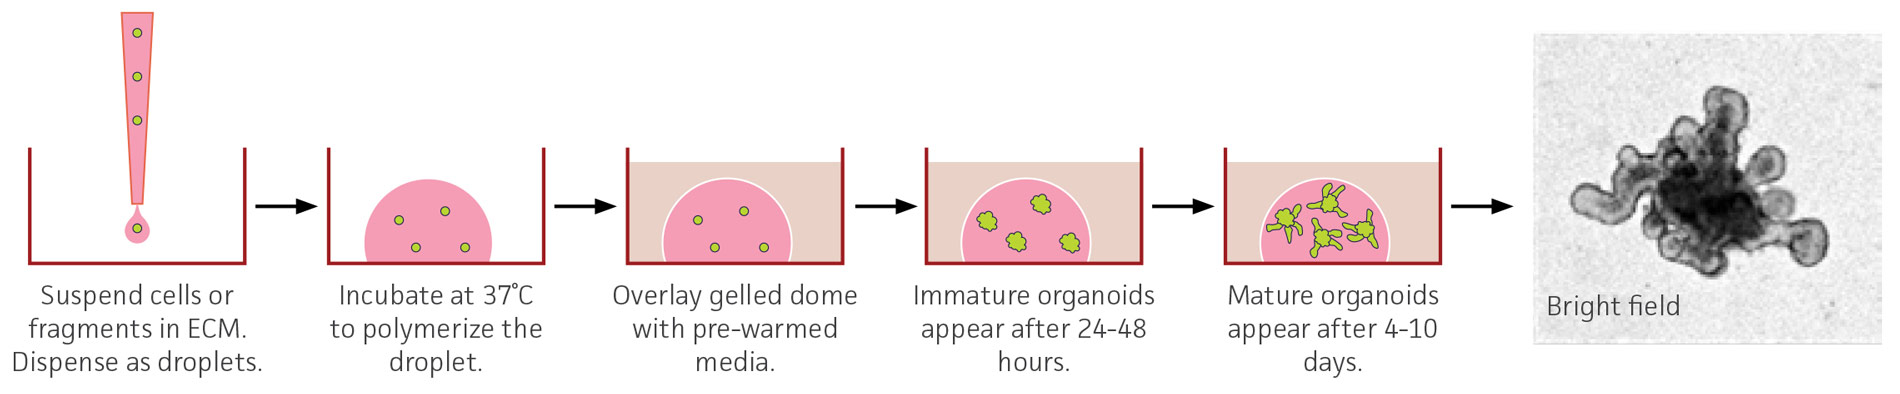 Schematic of a 3-D organoid culture.